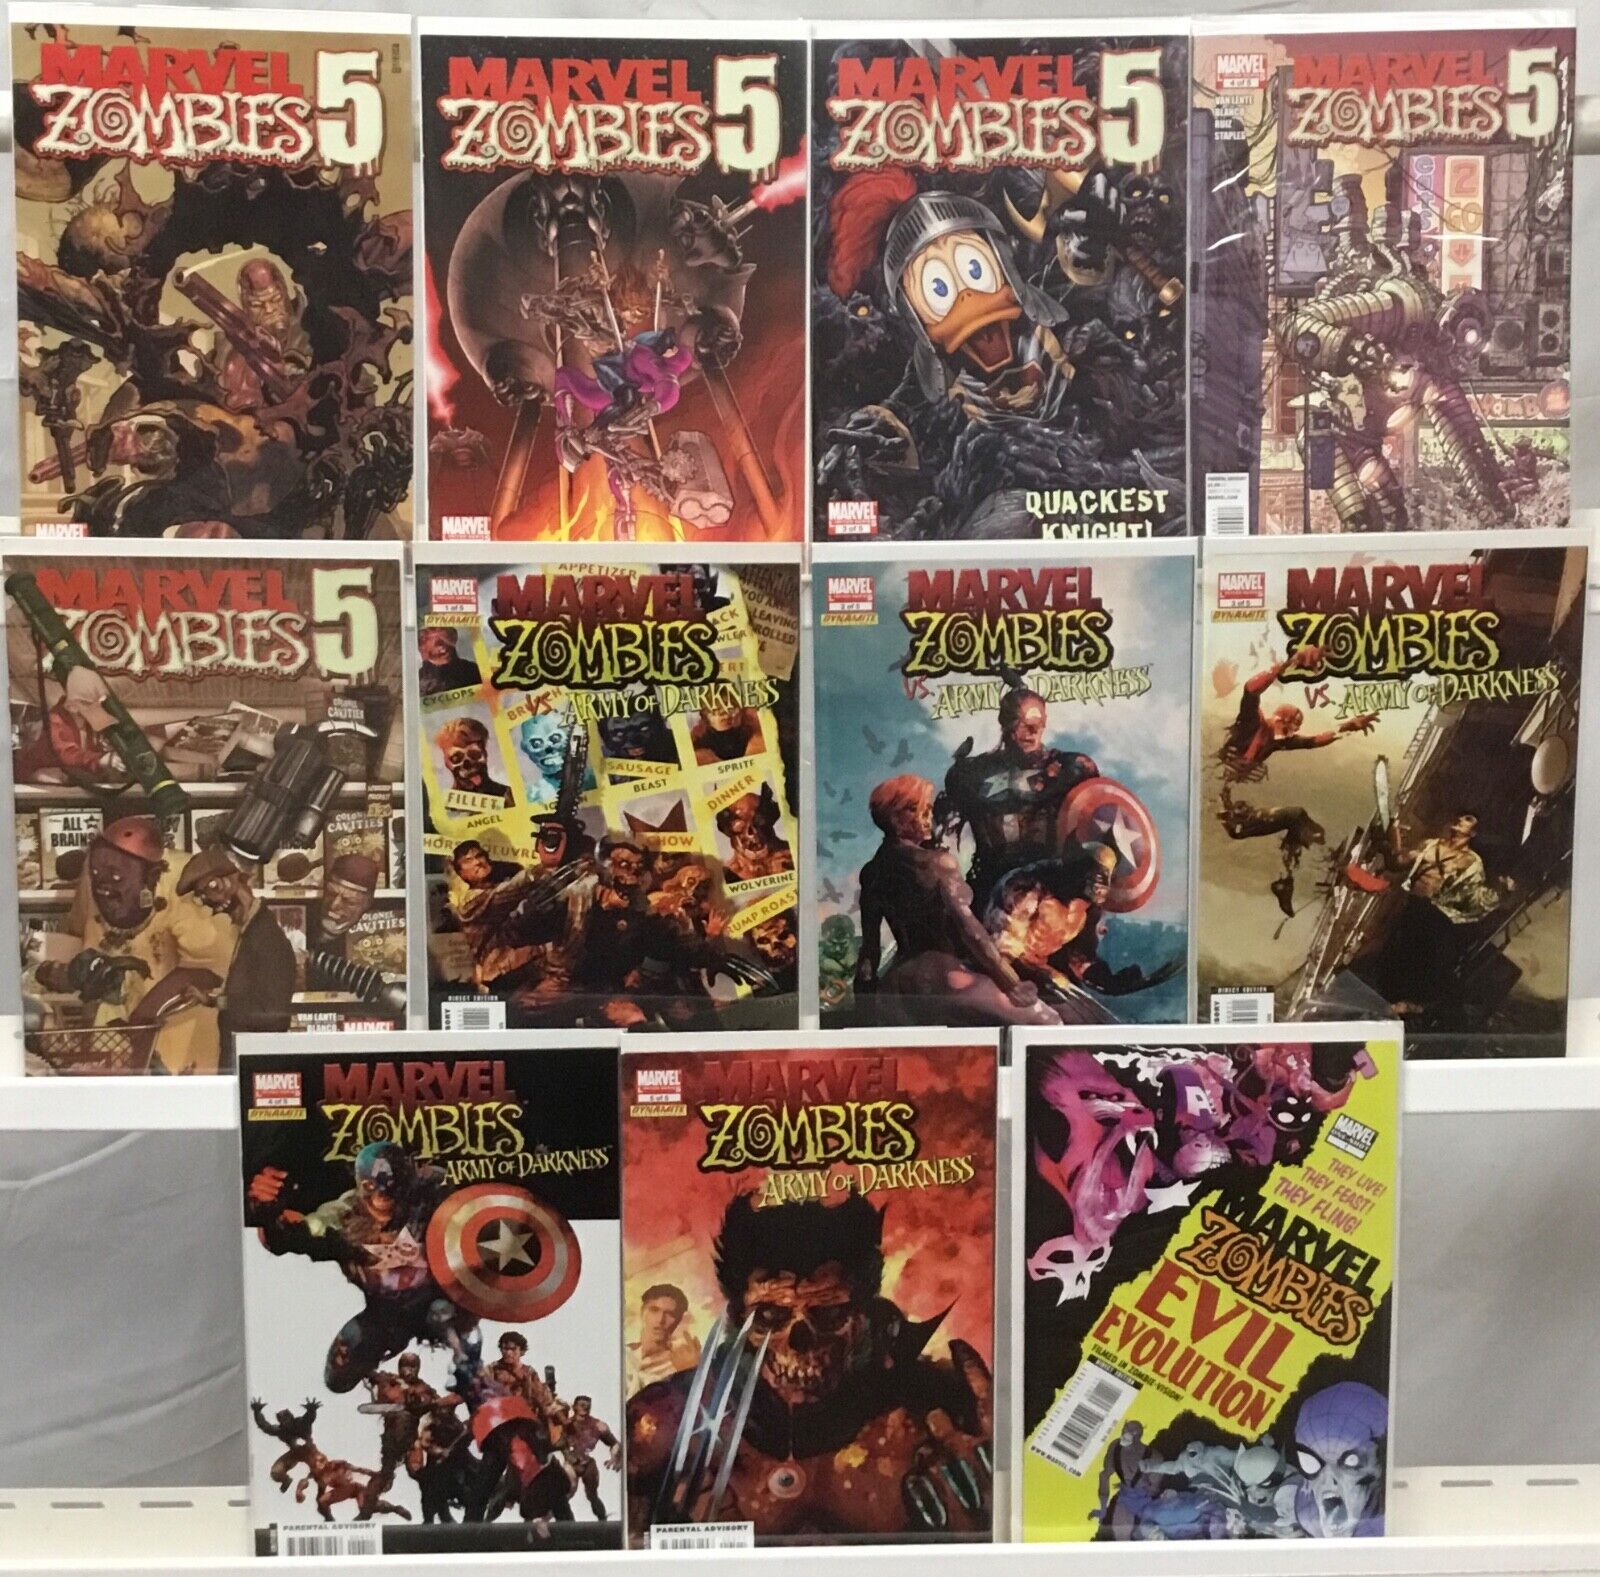 Marvel Zombies 5 1-5 / Marvel Zombies vs. Army of Darkness 1-5 Plus One-Shot